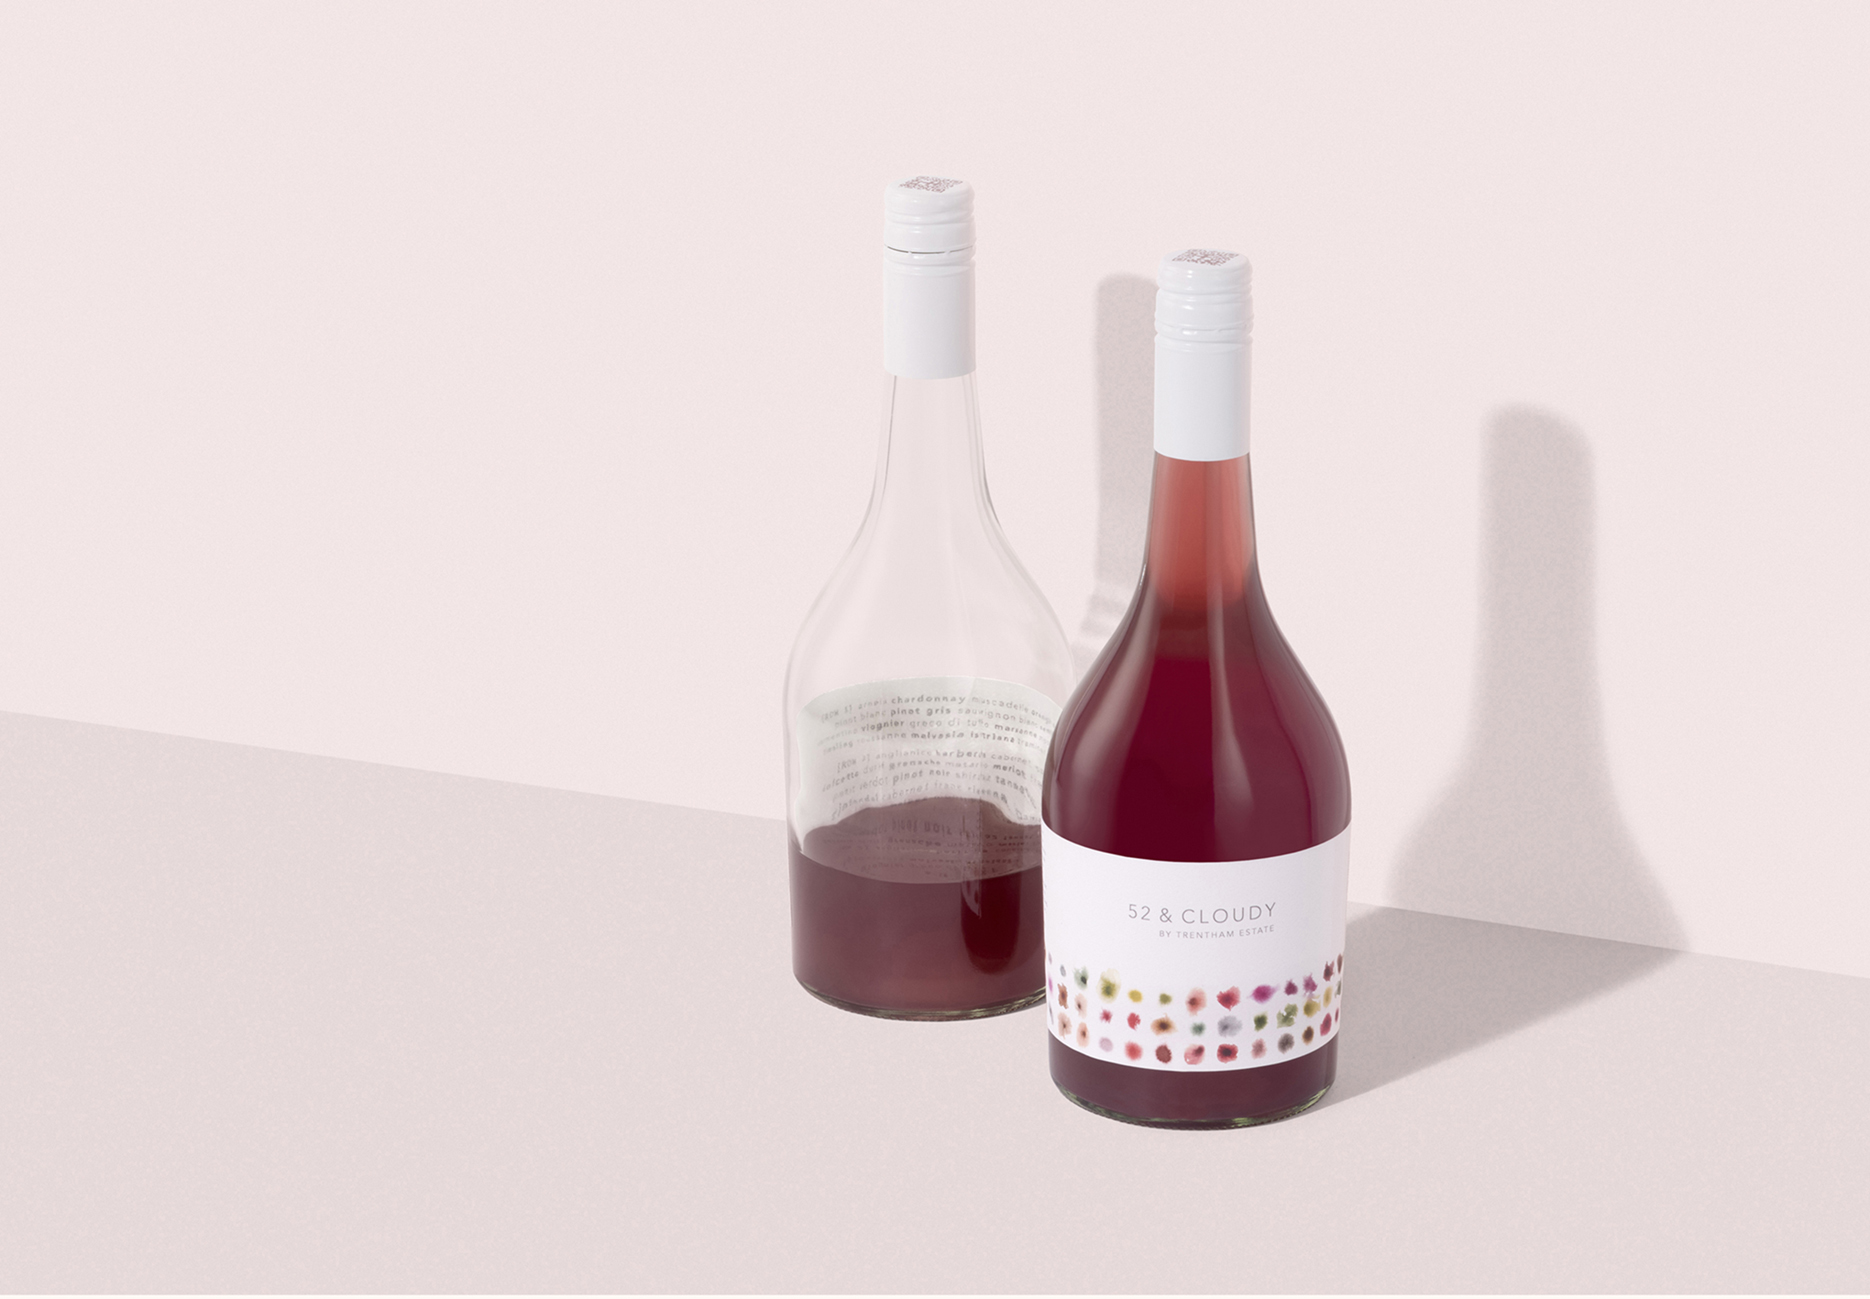 Design Energy Creates Branding and Packaging Design for 52 & Cloudy Wines